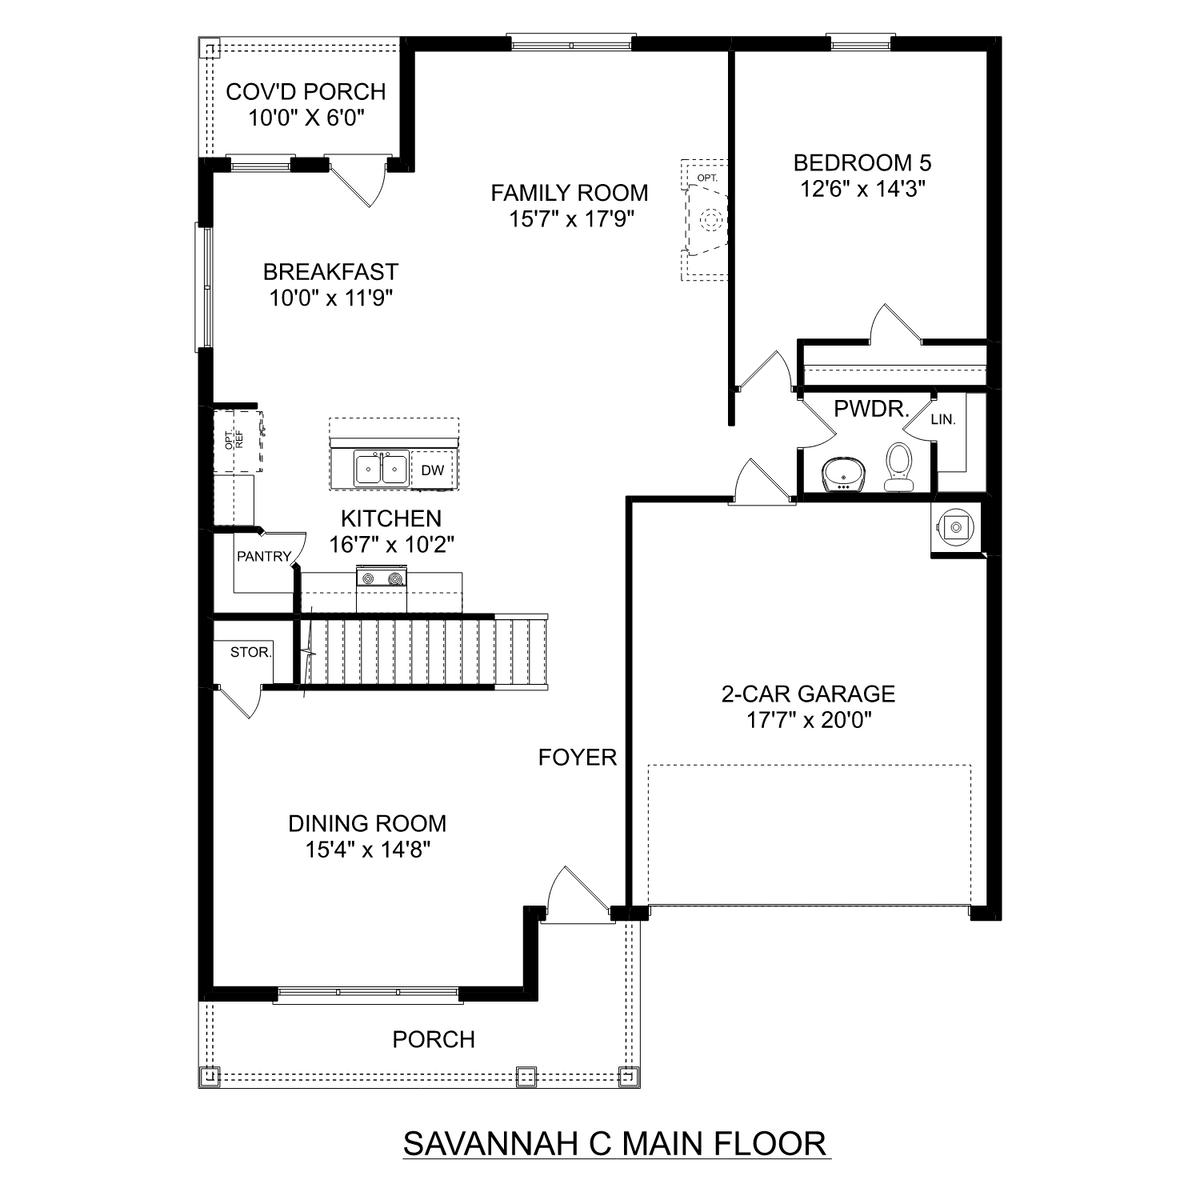 1 - The Savannah C floor plan layout for 4020 Rockland Circle in Davidson Homes' Monteagle Cove community.